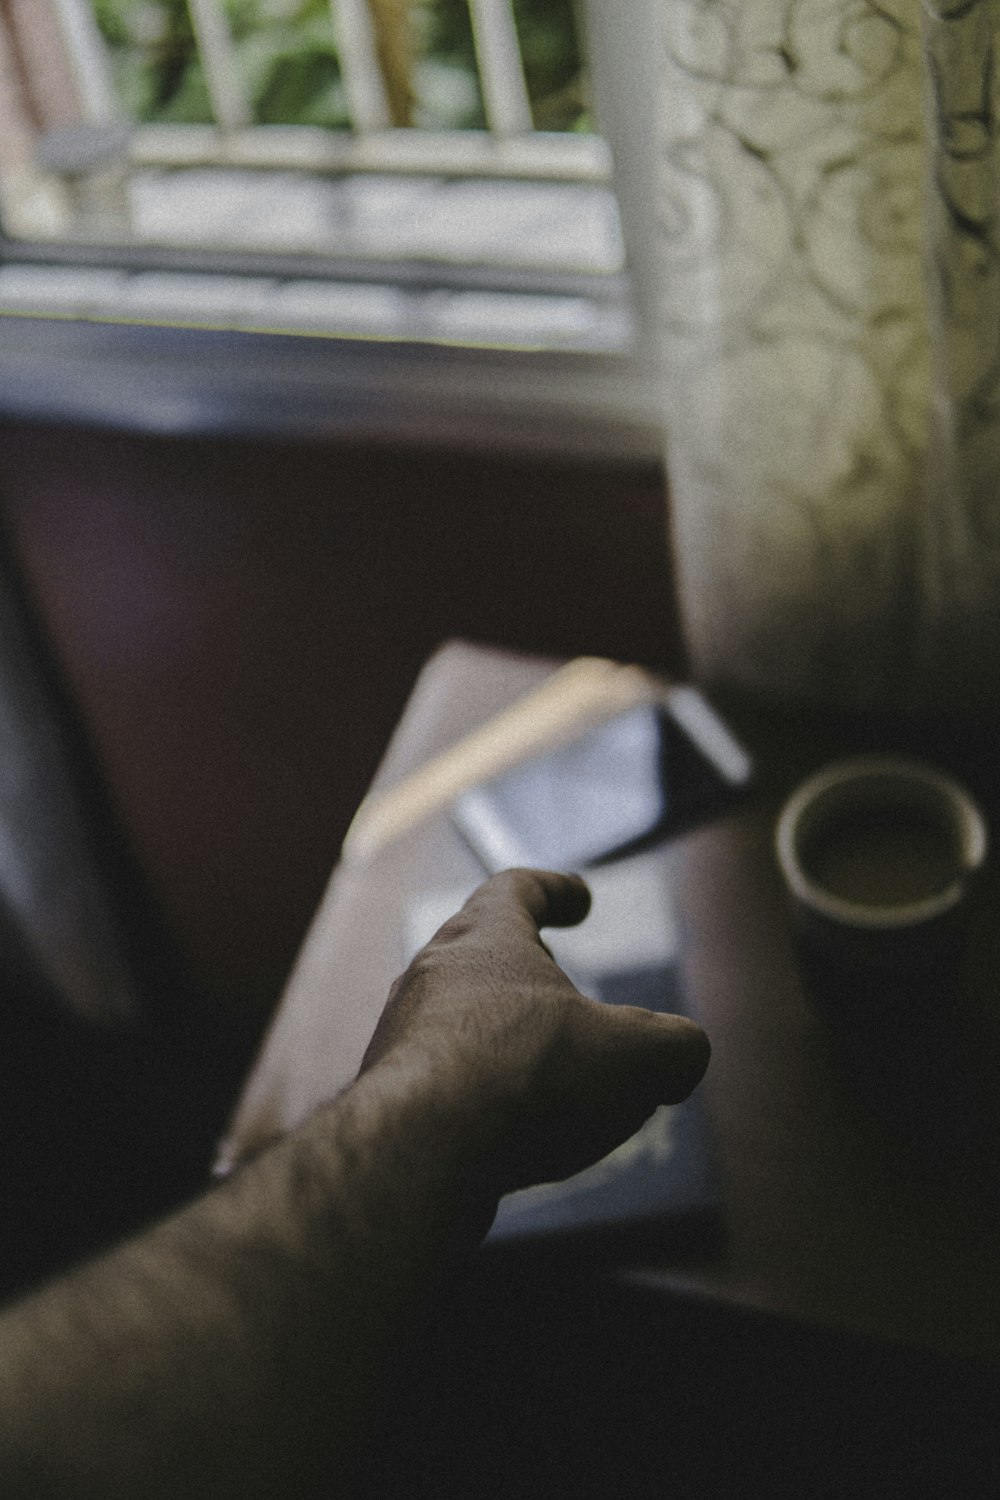 selective focus photo of person reaching out to book on table